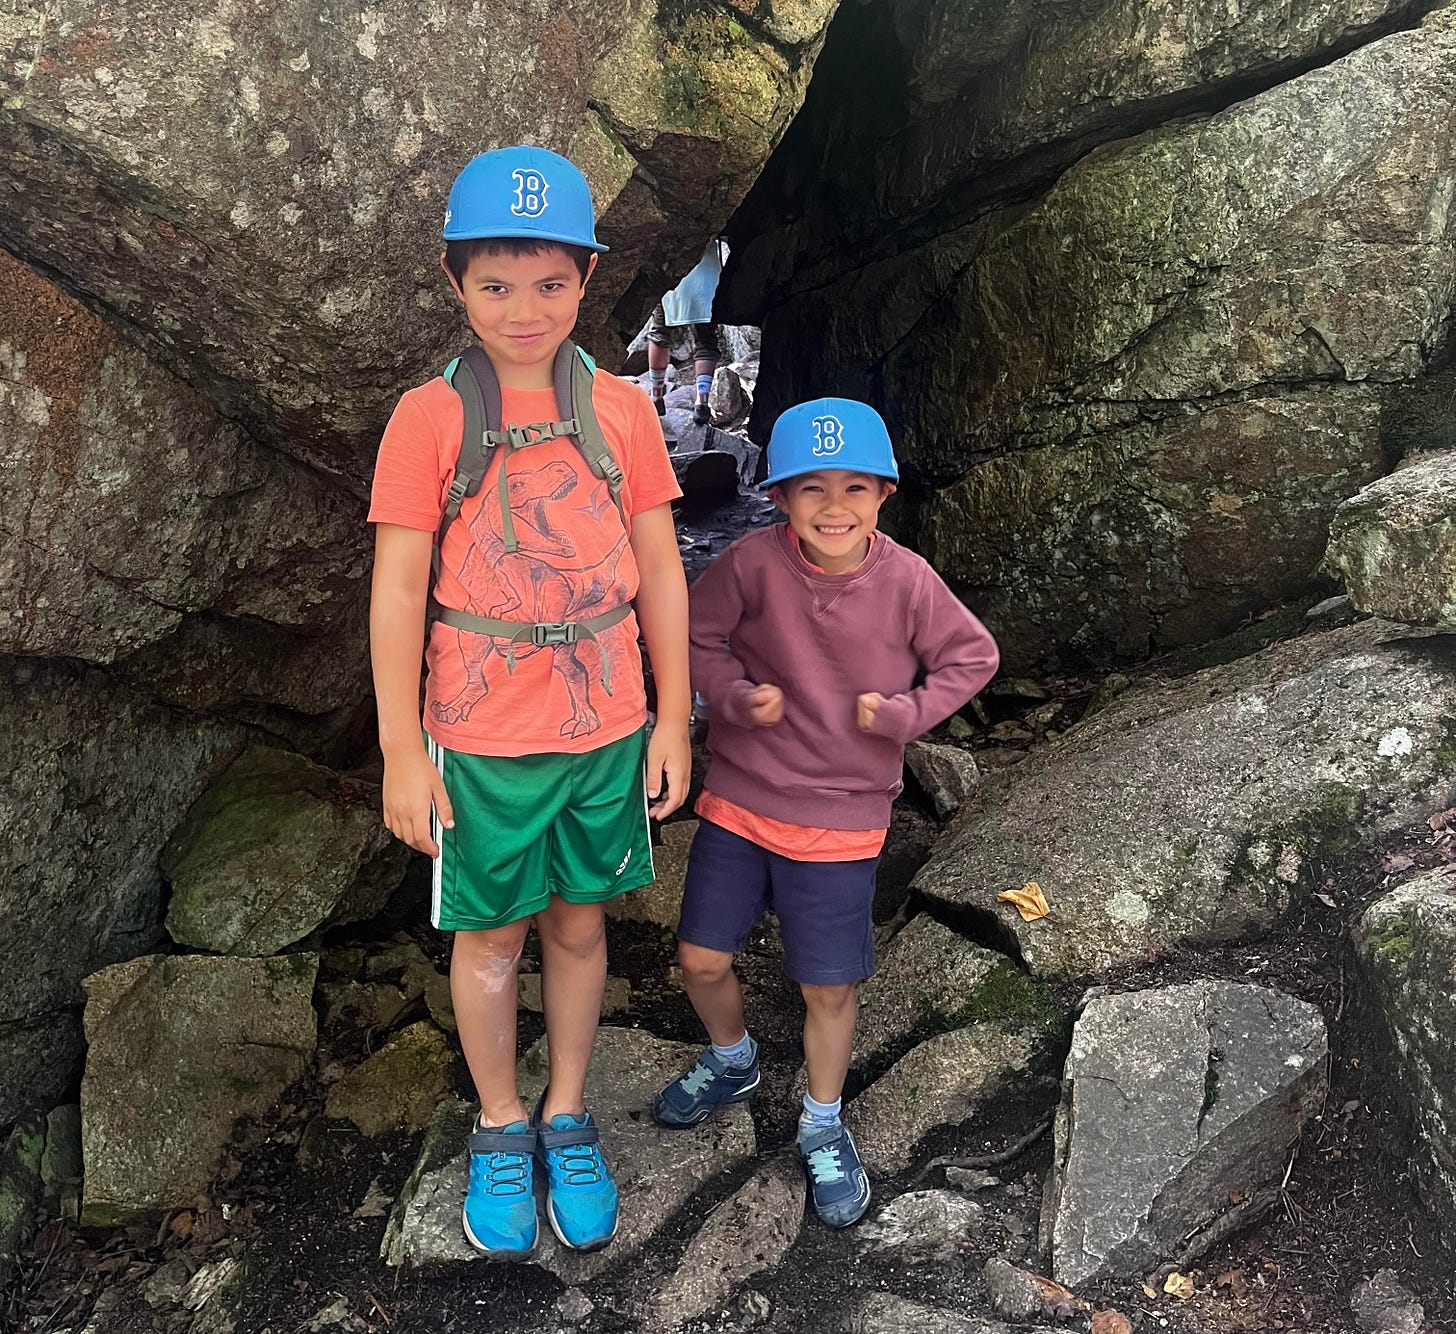 Blaise and Cass pose in front of a tunnel of big boulders wearing blue hats with the Red Sox "B" logo